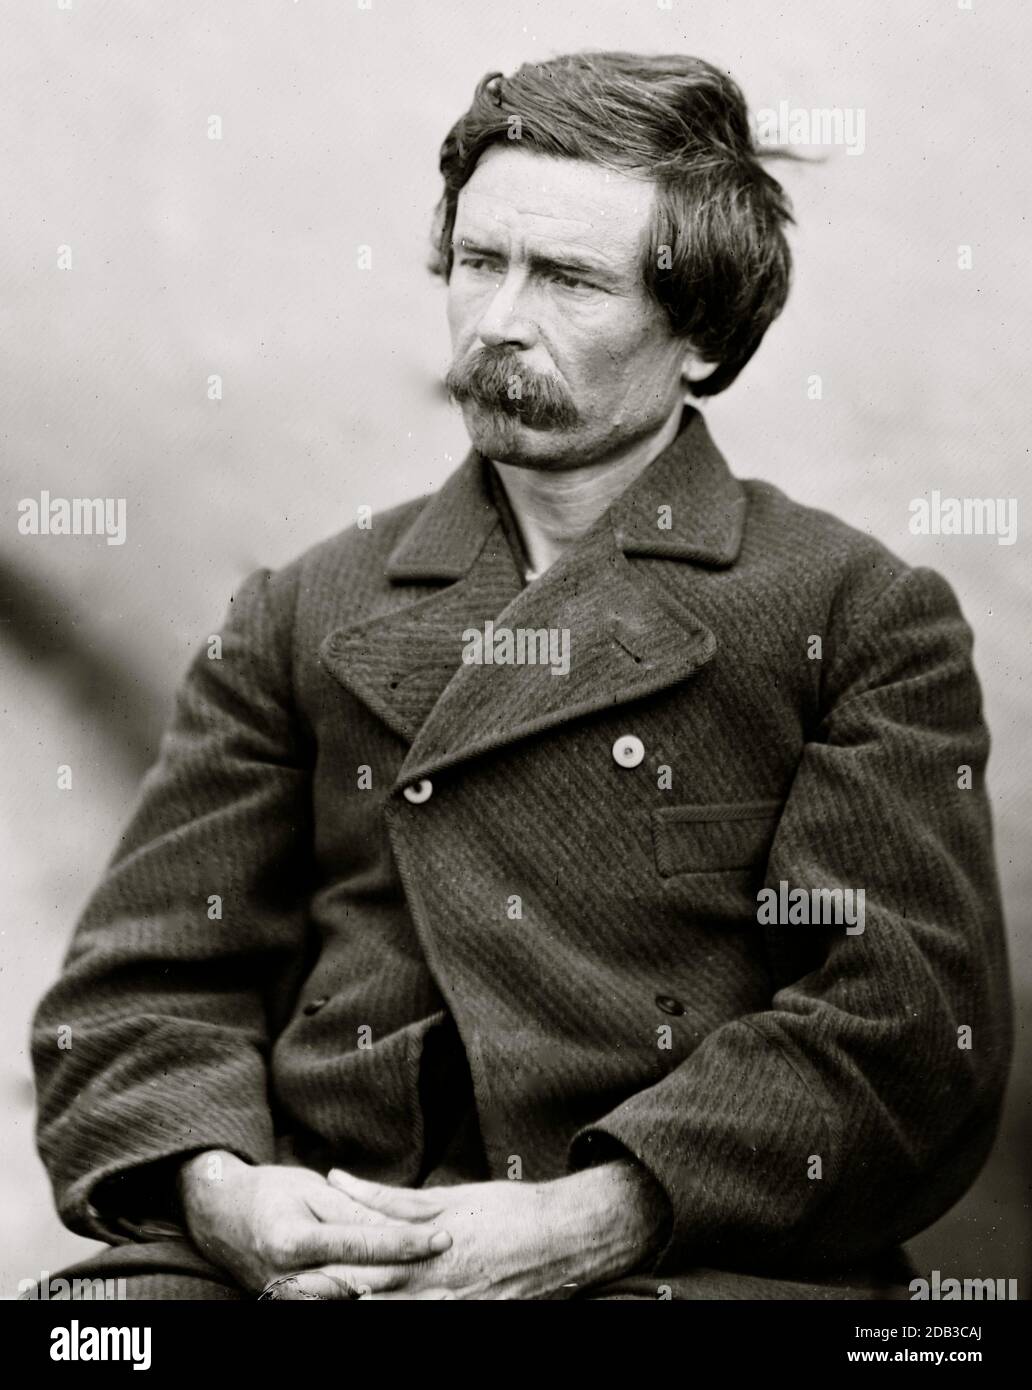 Washington Navy Yard, District of Columbia. Man arrested on suspicion of being one of the conspirators.. Stock Photo